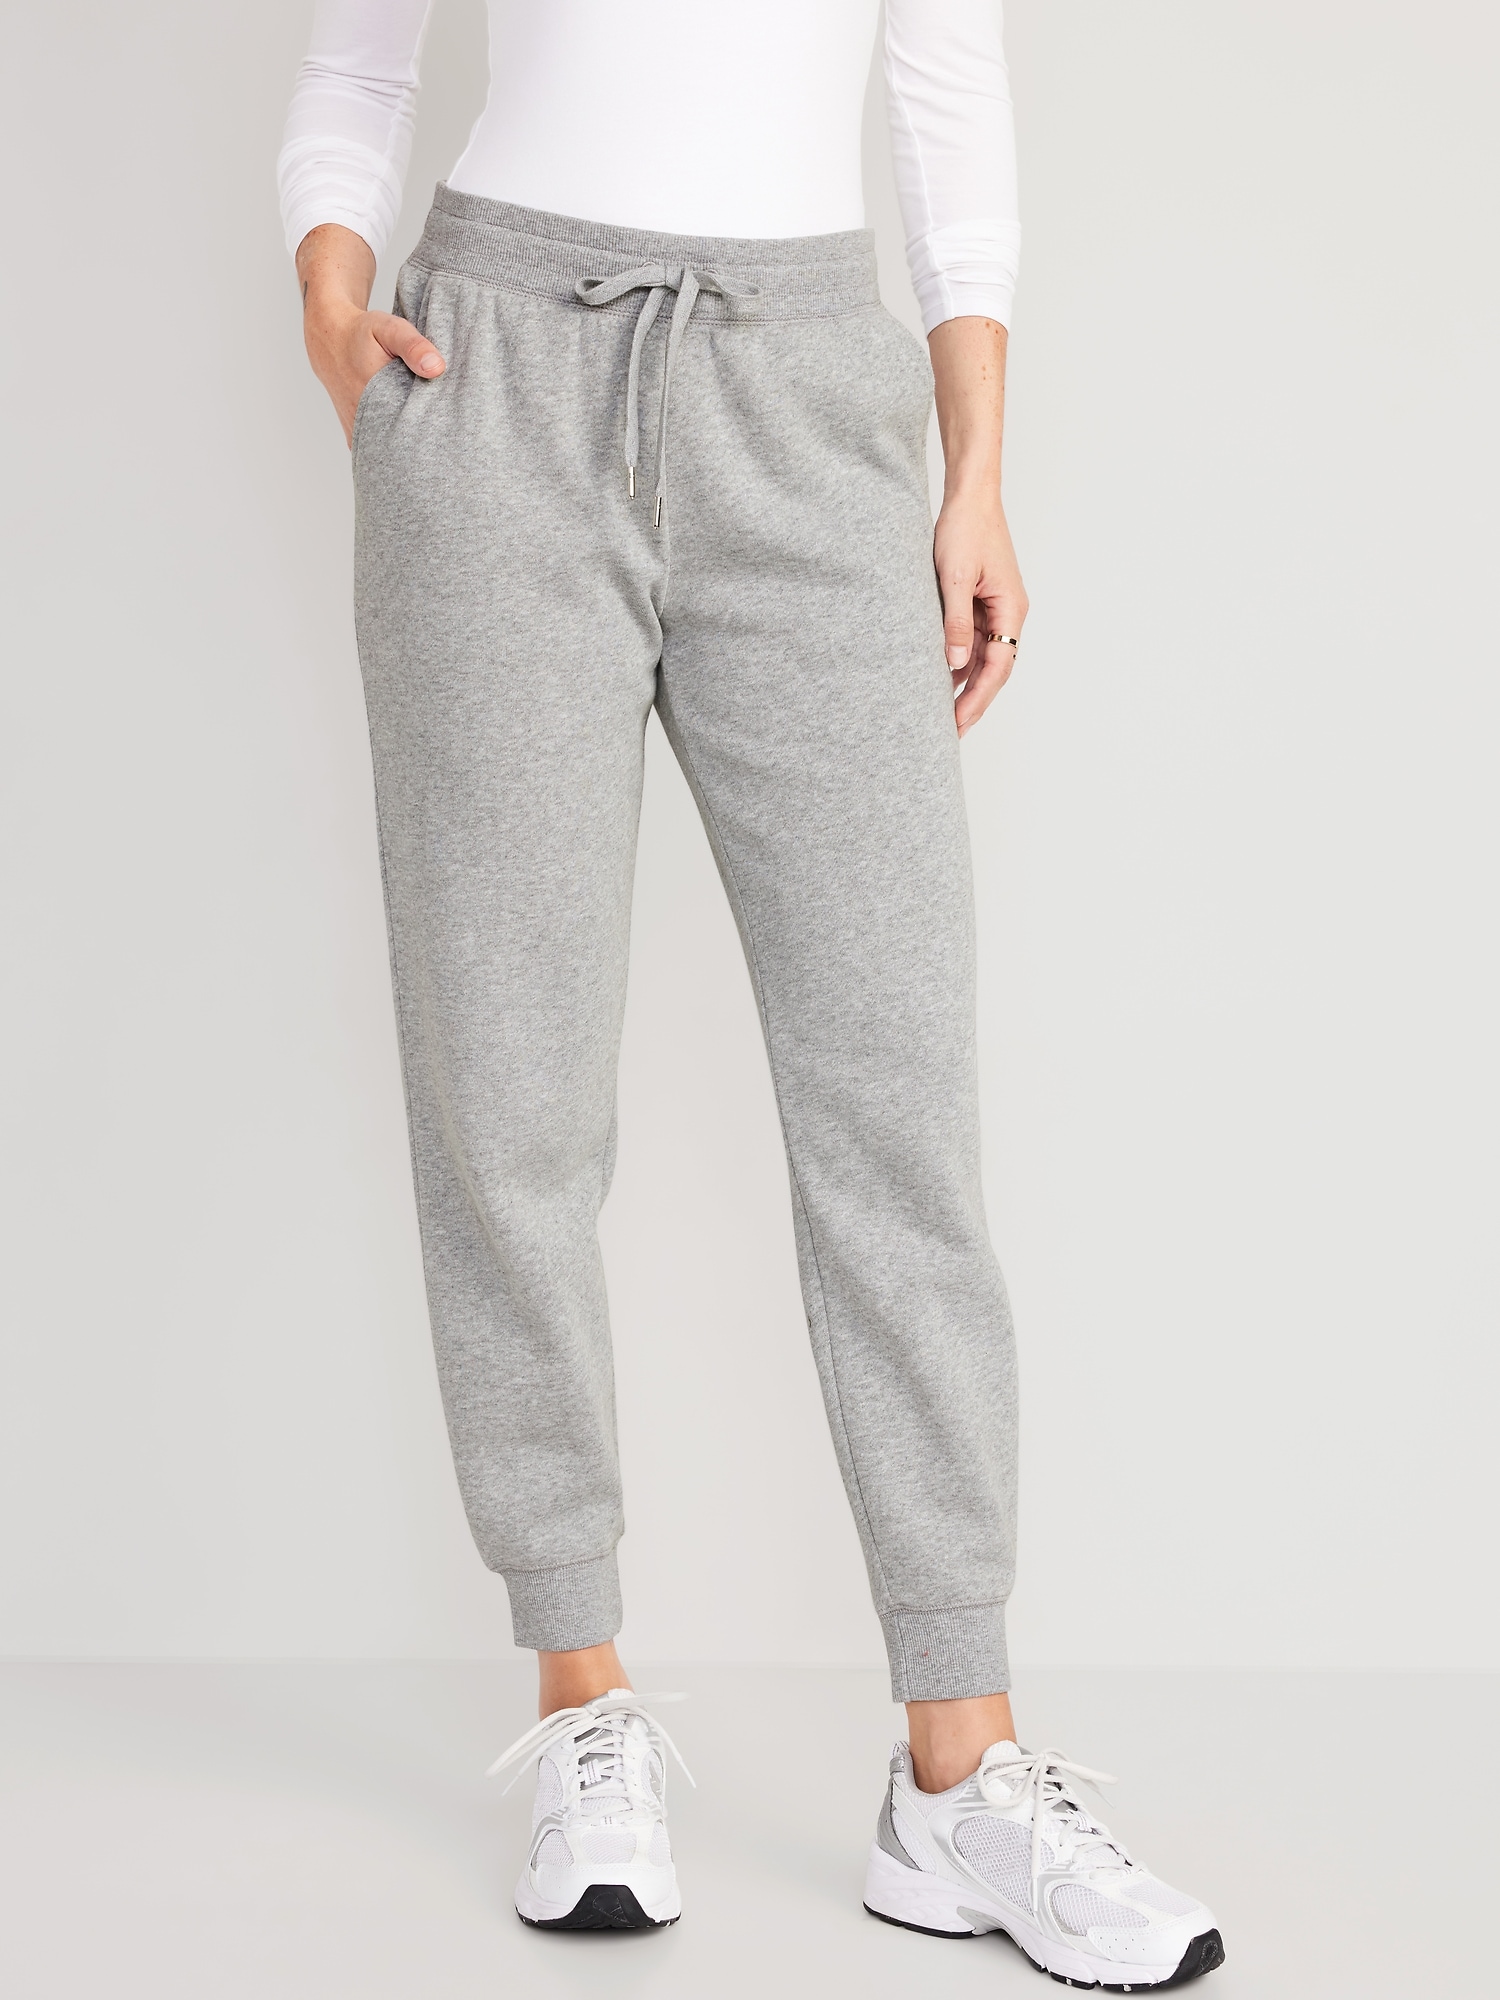 Mid-Rise Vintage Street Joggers for Women, Old Navy